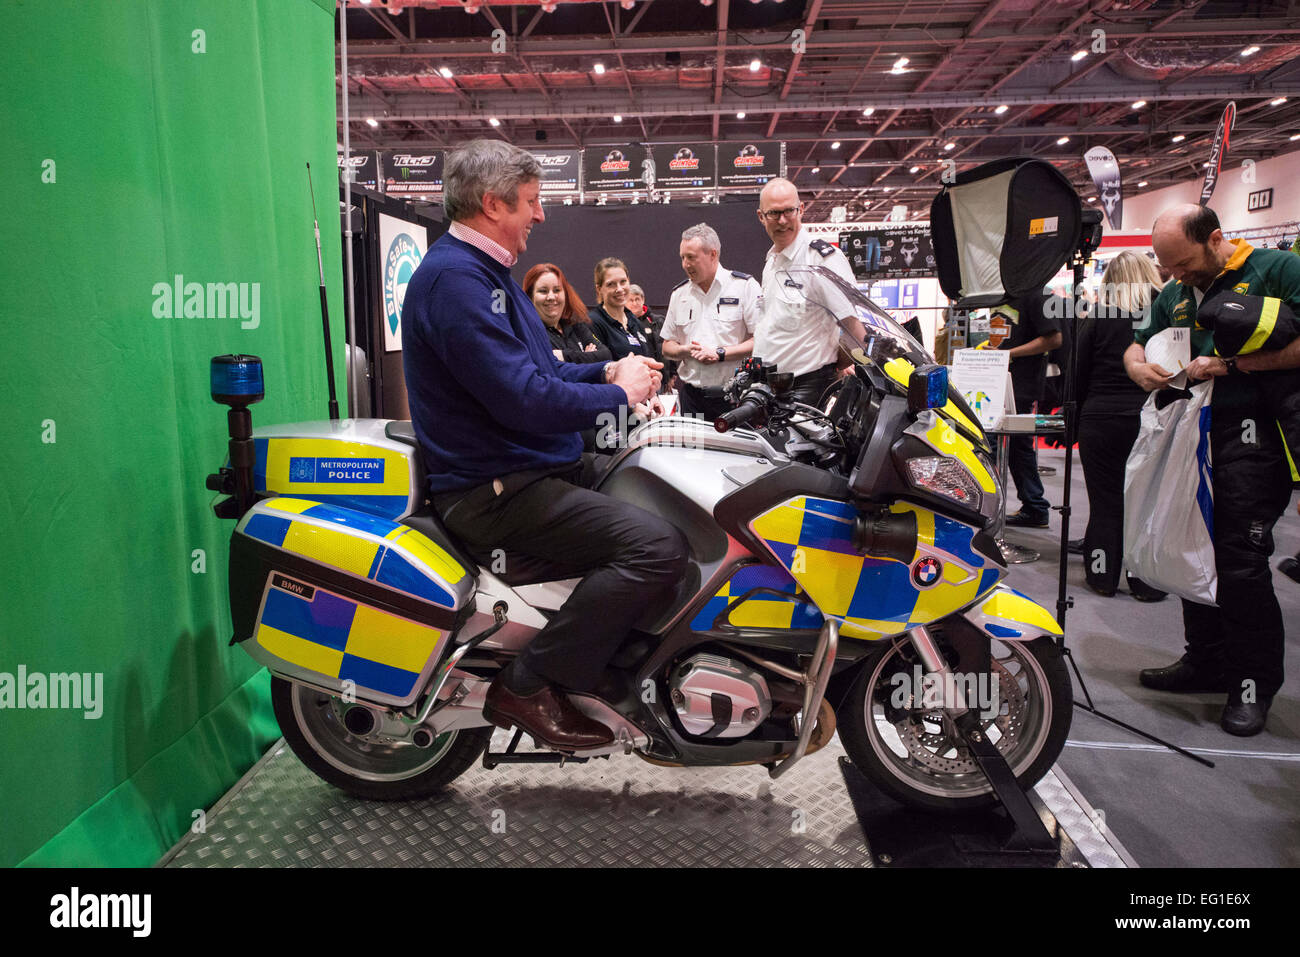 Feb. 13, 2015 - This unbelievable line-up of new models coming from the world's leading manufacturers straight to the Carole Nash MCN London Motorcycle Show.Visitors over the three days will get to see new machines such as the BMW R1200R, Ducati Scrambler, Kawasaki H2, KTM 1290 Super Adventure, Suzuki GSX-S1000, Triumph Street Triple RX and the eagerly anticipated, all-new Yamaha YZF-R1. It's a multi stage, multi event and multi star-studded show that promises to pack the entire world of motorcycling into one massive weekend. © Velar Grant/ZUMA Wire/ZUMAPRESS.com/Alamy Live News Stock Photo